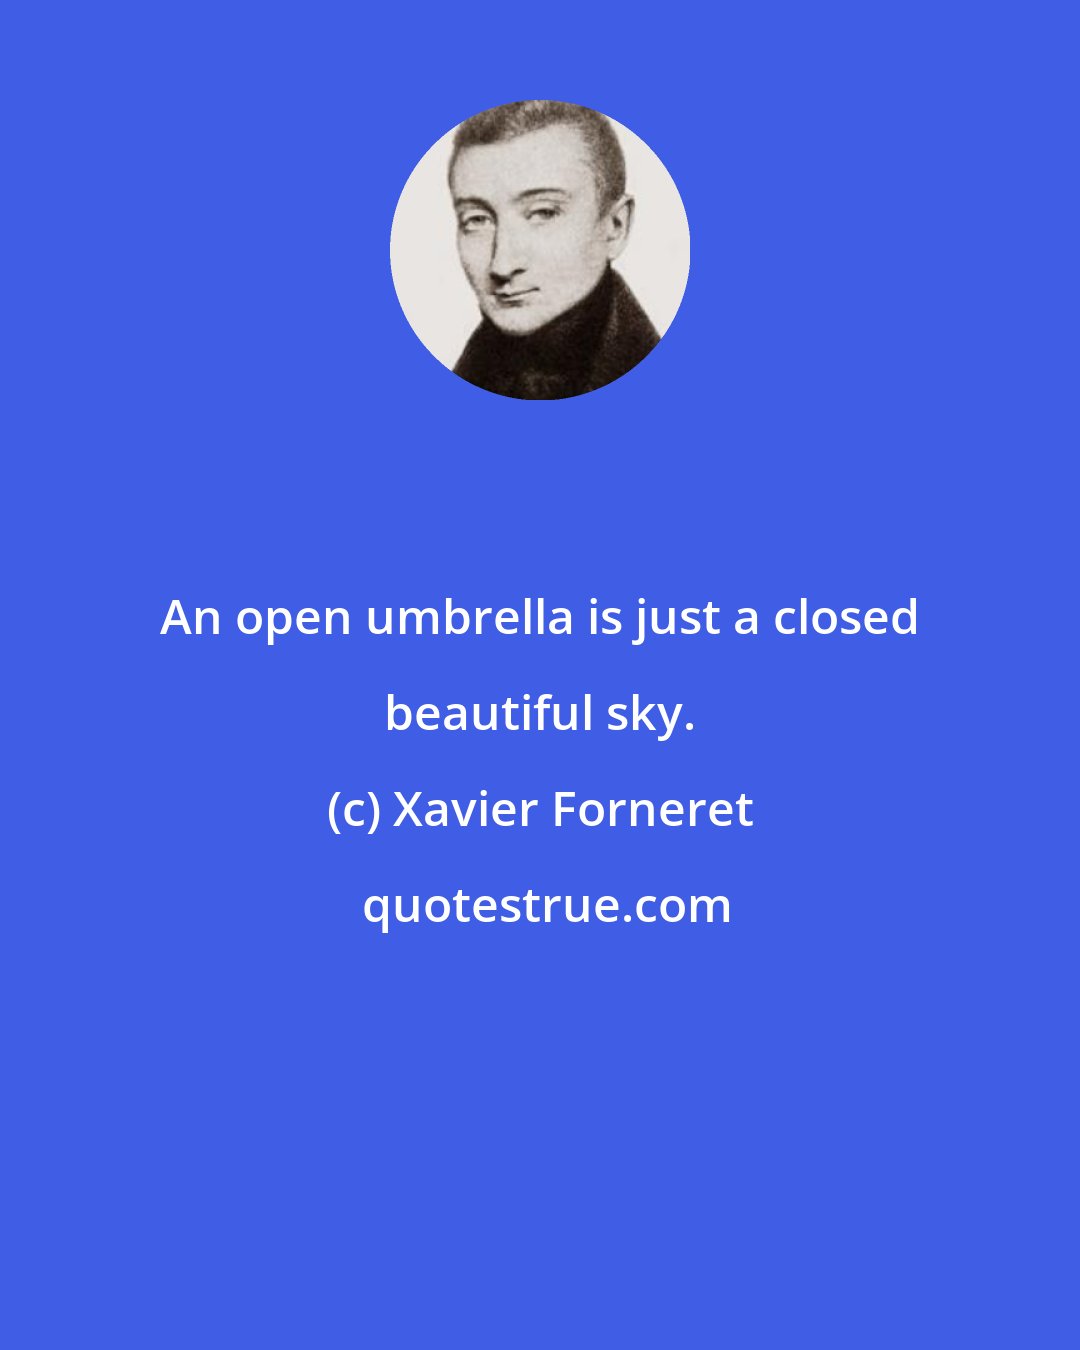 Xavier Forneret: An open umbrella is just a closed beautiful sky.